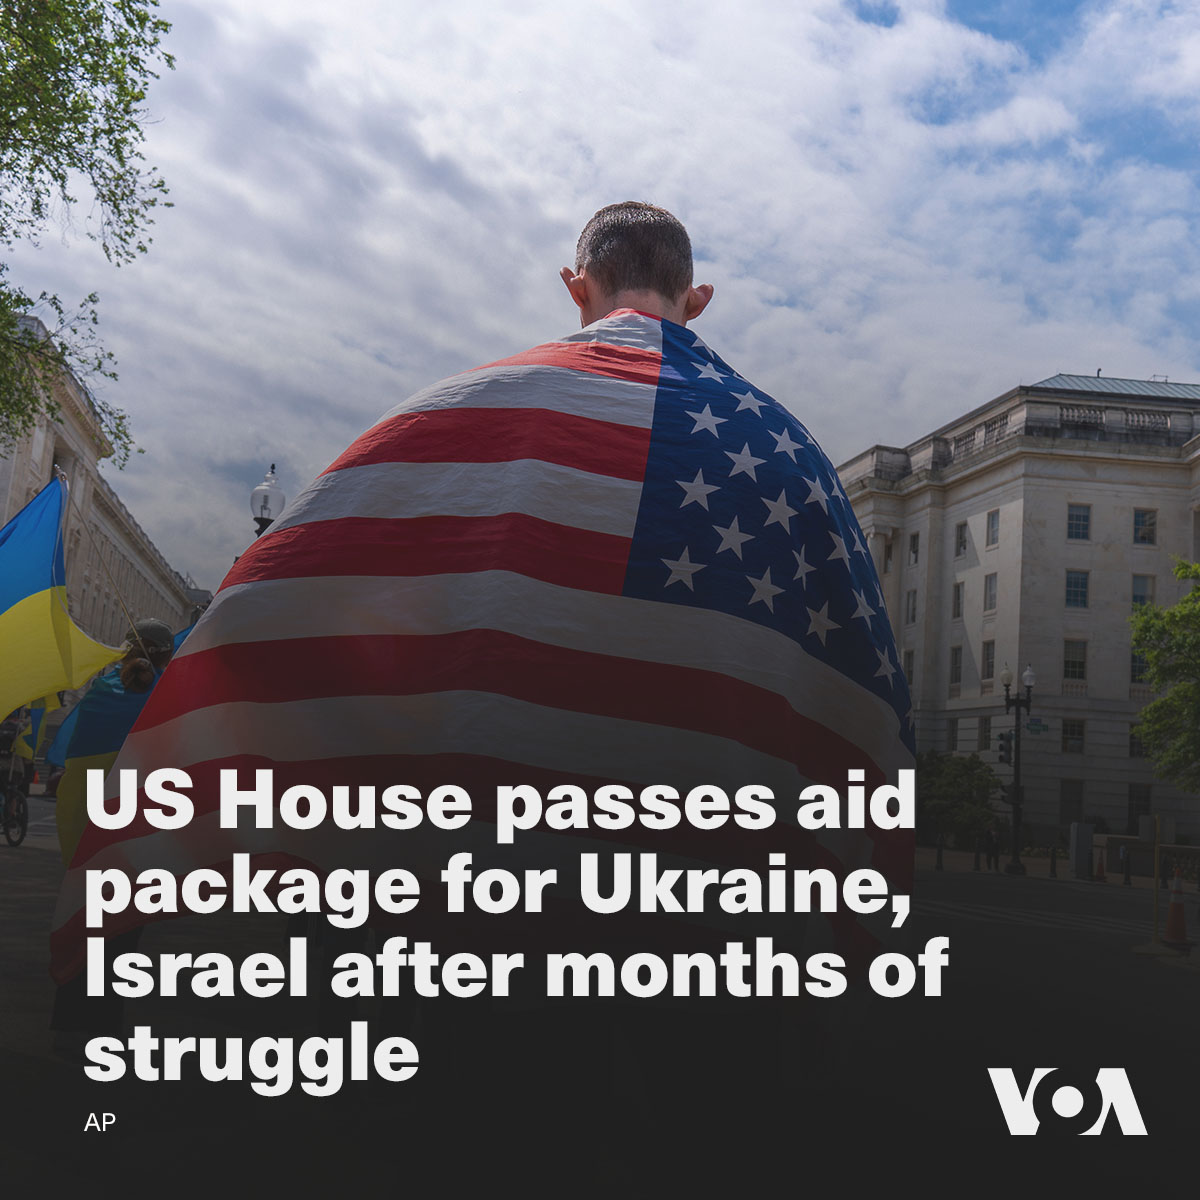 US House passes aid package for Ukraine, Israel after months of struggle voanews.com/a/us-house-pas…